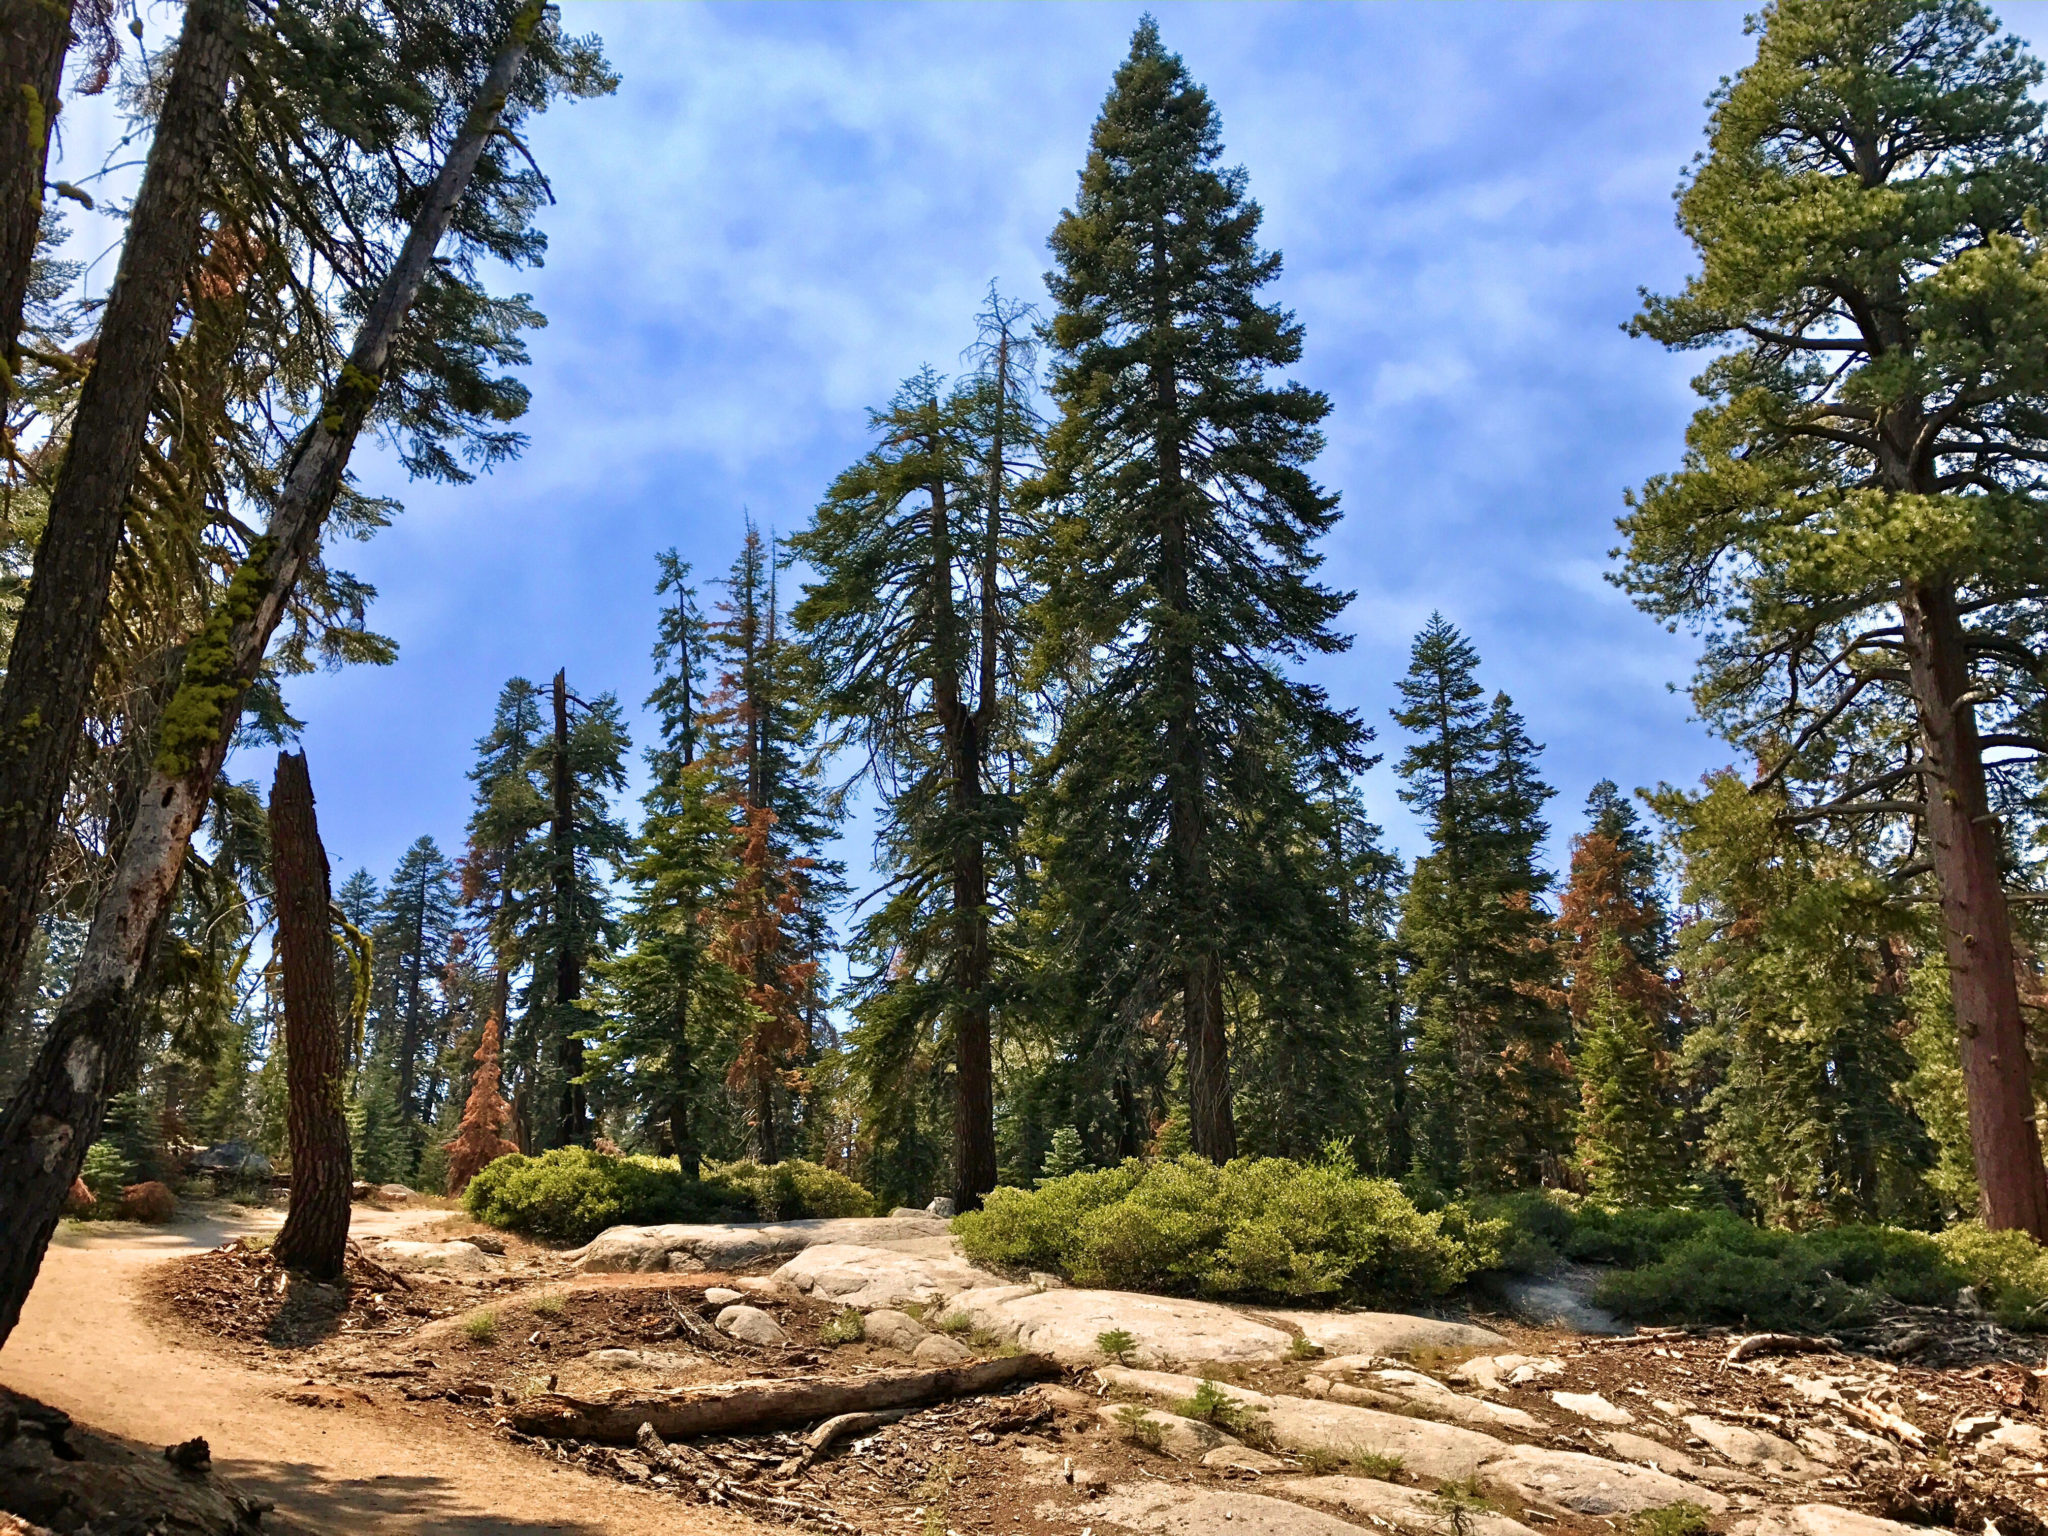 On the trail to Taft Point